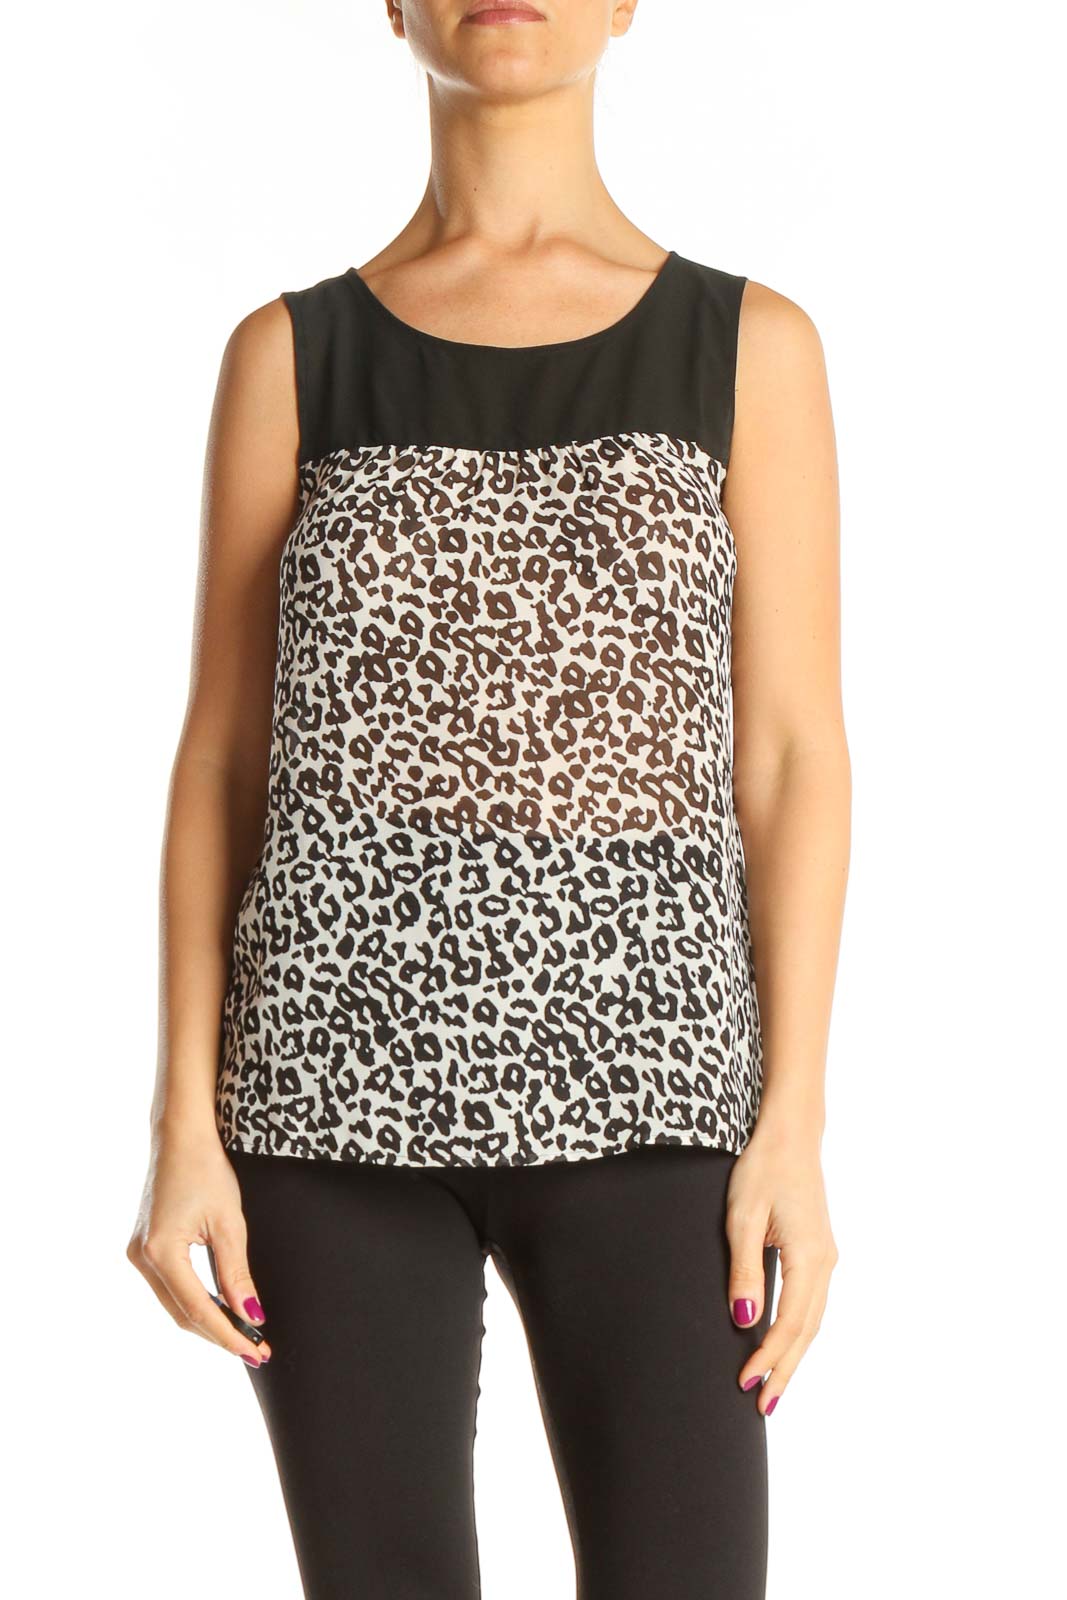 Brown Animal Print Casual Top Front